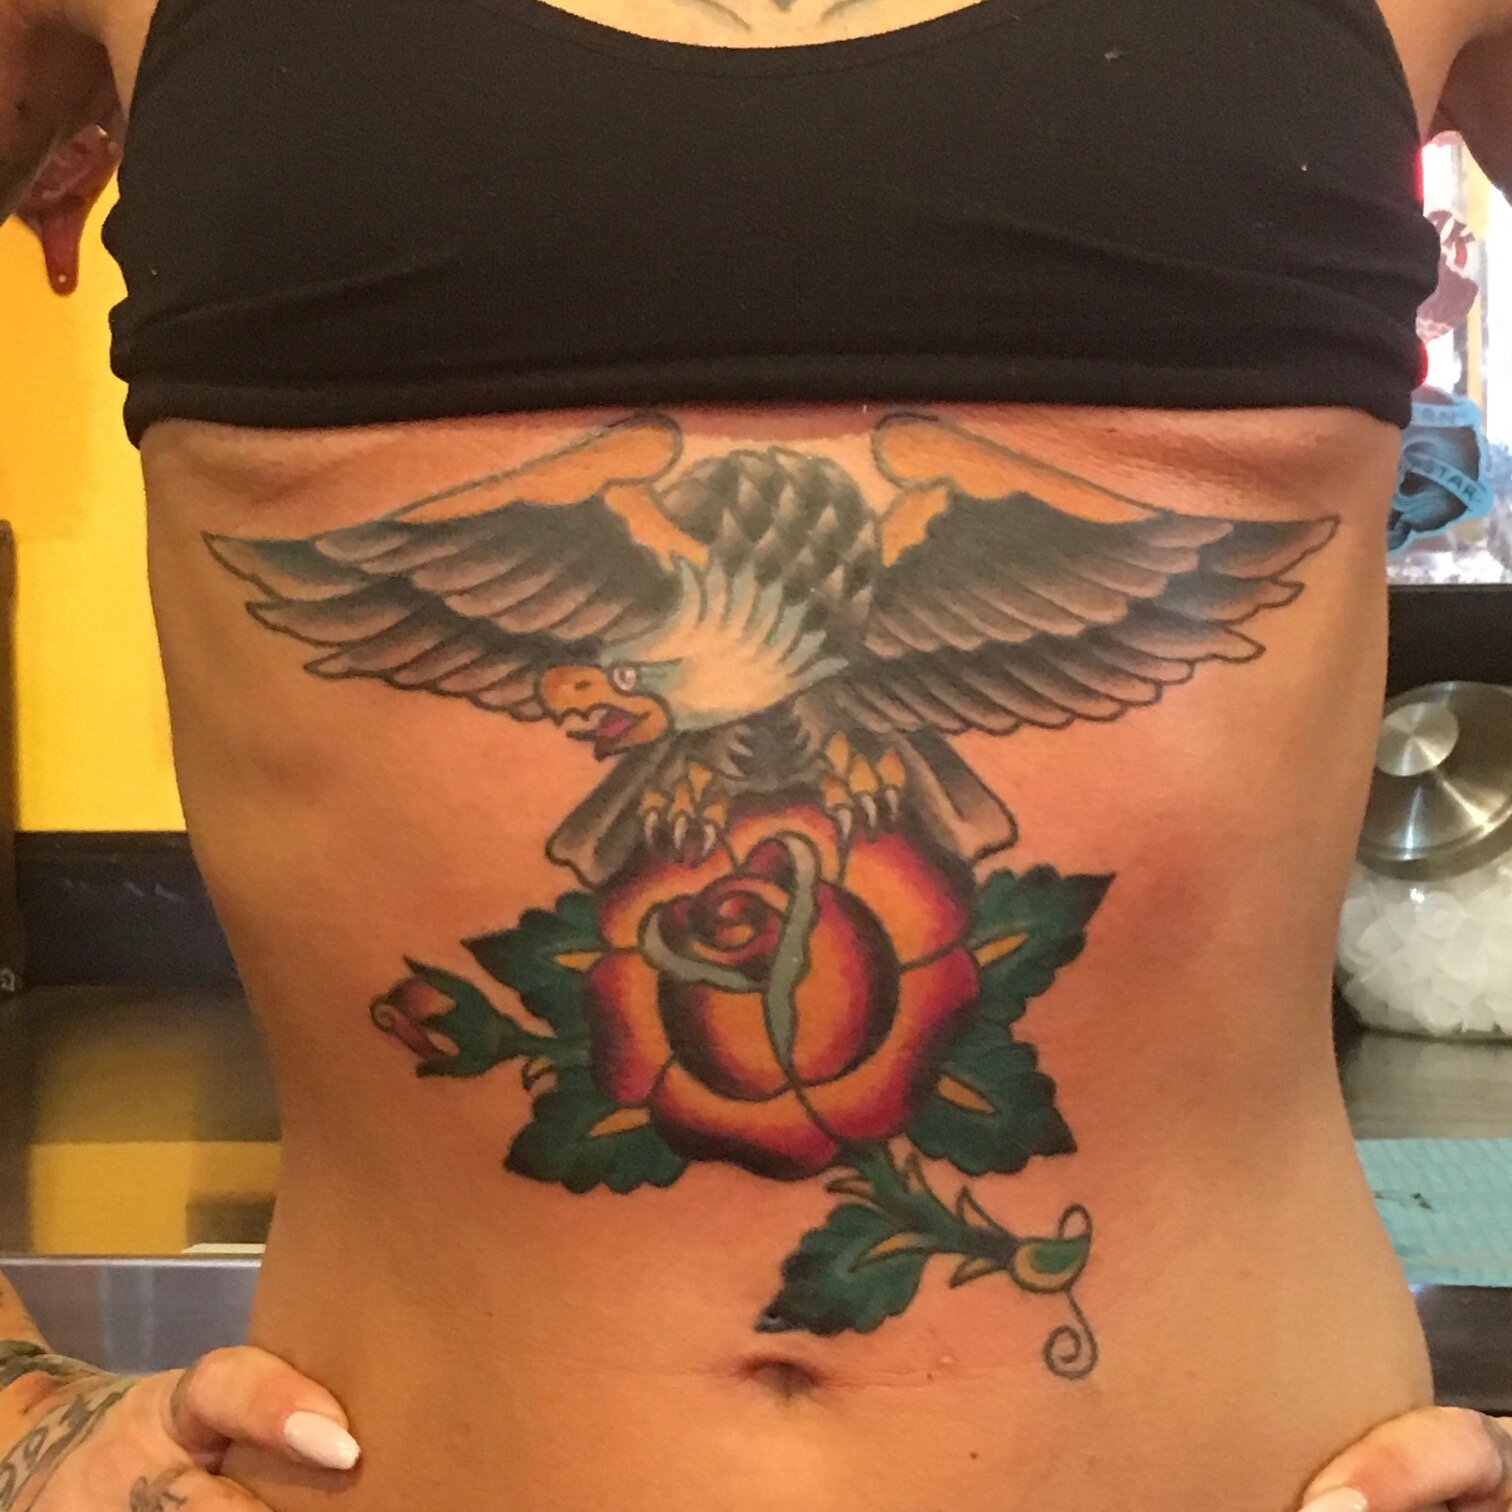 Traditional eagle tattoo on stomach by Josh Hanes at Southern Star Tattoo in Atlanta, Georgia